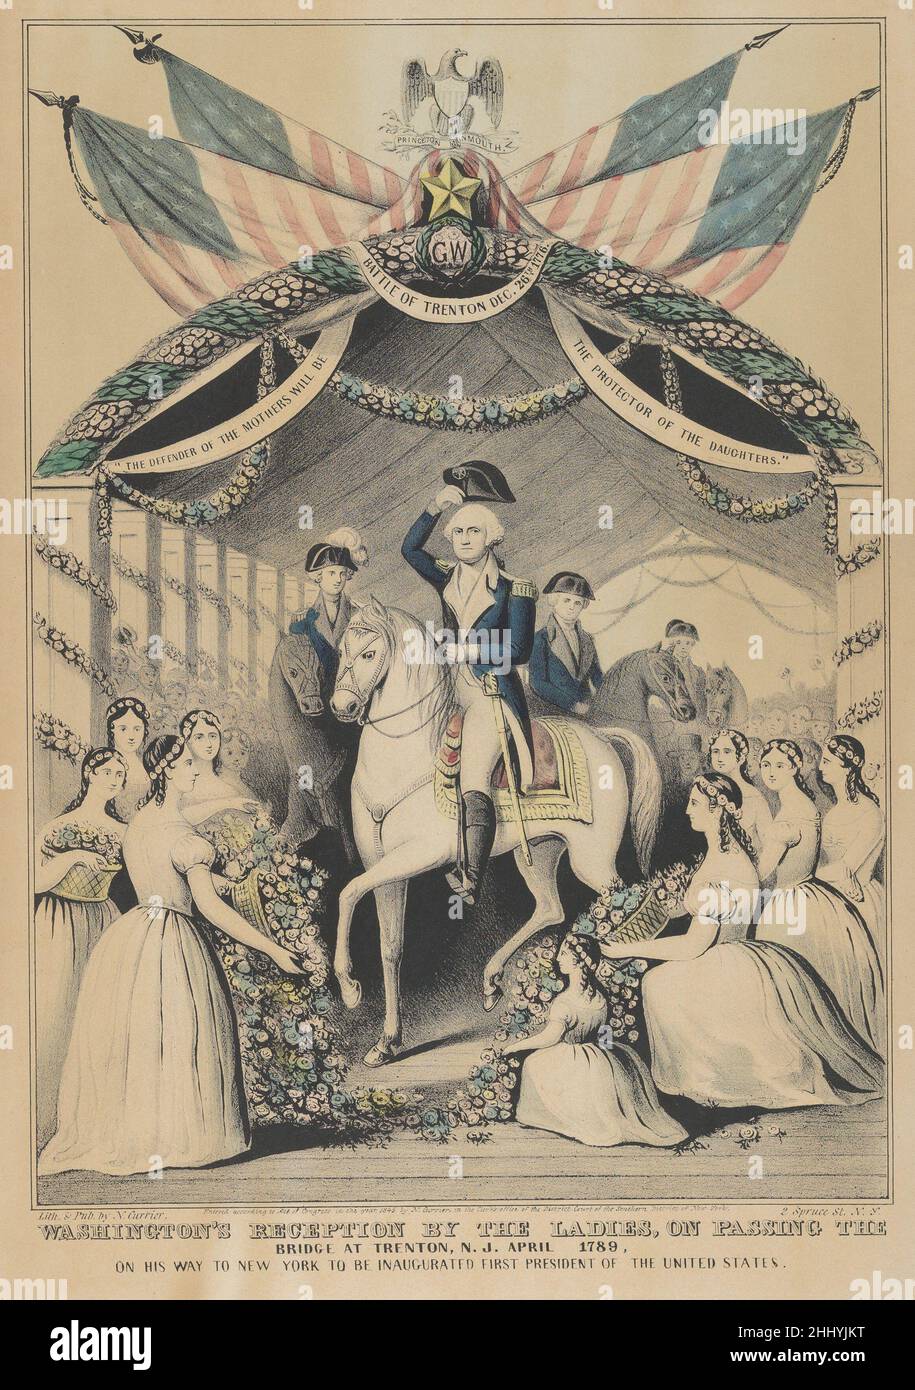 Washington's Reception by the Ladies on Passing the Bridge at Trenton, N.J., April 1789, on His Way to be Inaugurated First President of the United States 1845 Lithographed and published by Nathaniel Currier American George Washington on horseback, accompanied by other gentlemen, is greeted by ladies bearing flowers as he rides over the bridge at Trenton. Banners bear the following inscriptions: 'Battle of Trenton, December 26, 1776' 'The Defender of the Mothers will be the Proctector of the Daughters.'. Washington's Reception by the Ladies on Passing the Bridge at Trenton, N.J., April 1789, o Stock Photo